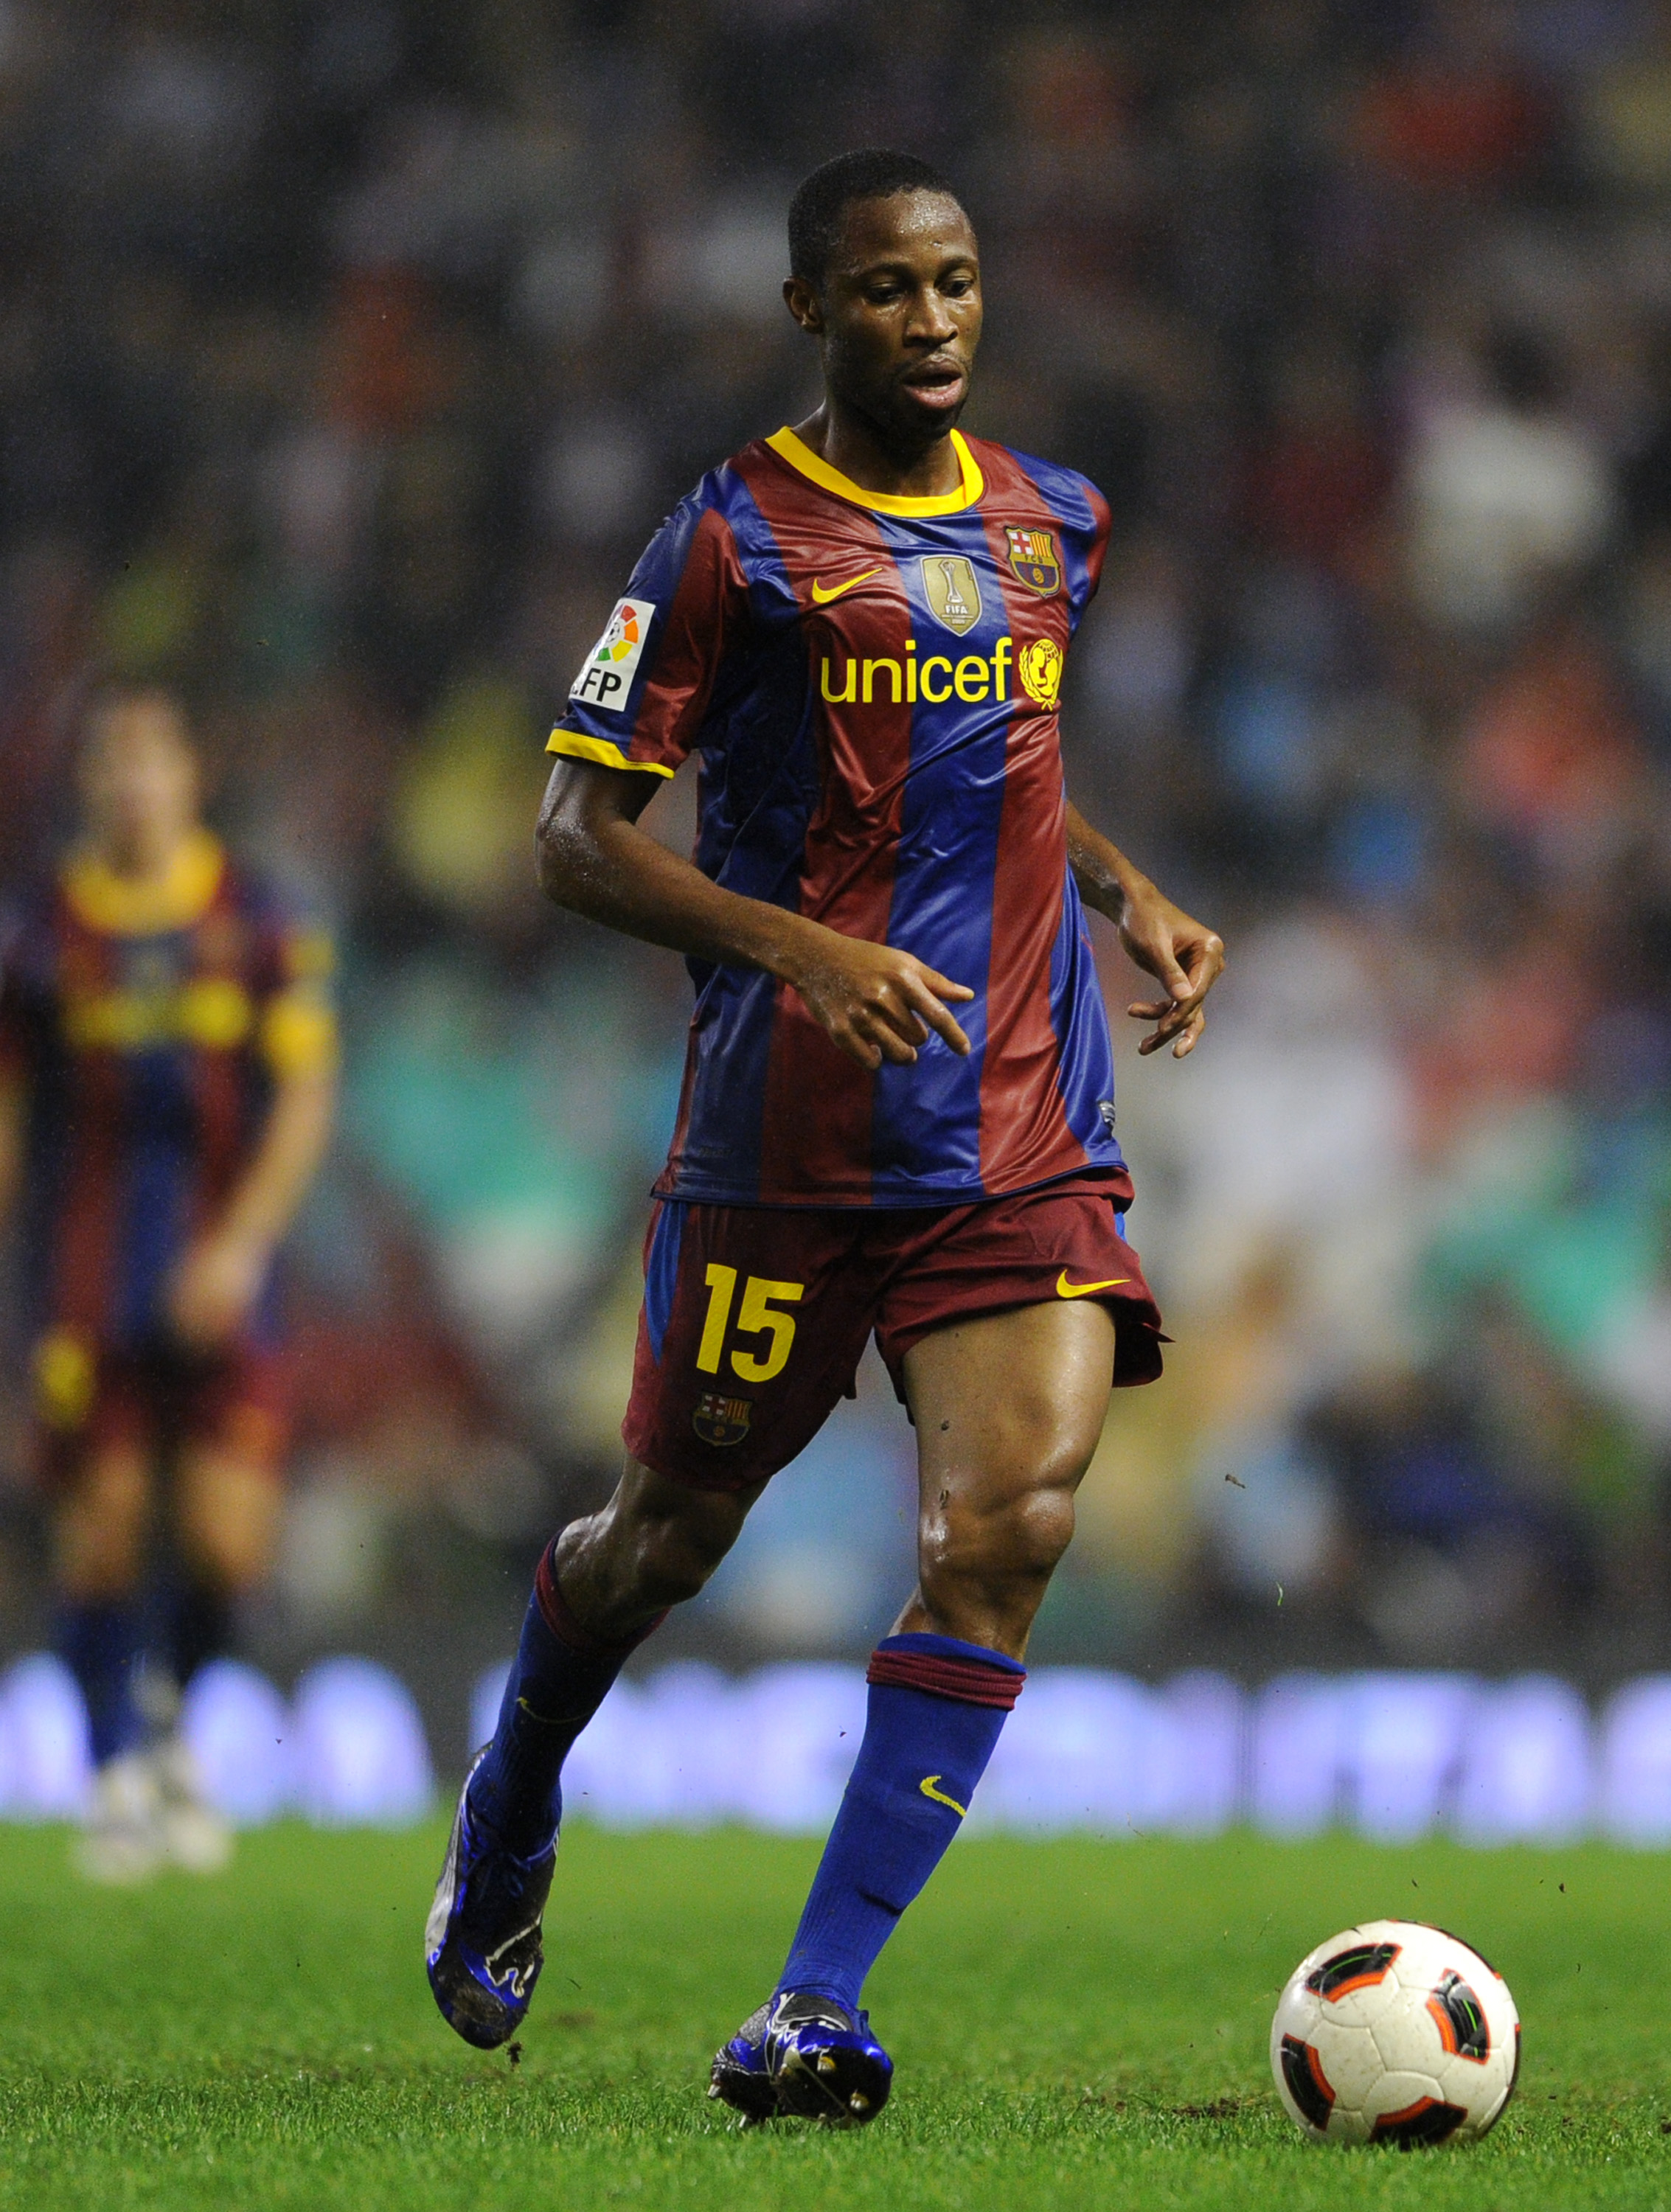 BILBAO, SPAIN - SEPTEMBER 25:  Seydou Keita of Barcelona runs with the ball during the La Liga match between Athletic Bilbao and Barcelona at the San Mames Stadium on September 25, 2010 in Bilbao, Spain. Barcelona won the match 3-1.  (Photo by Jasper Juin